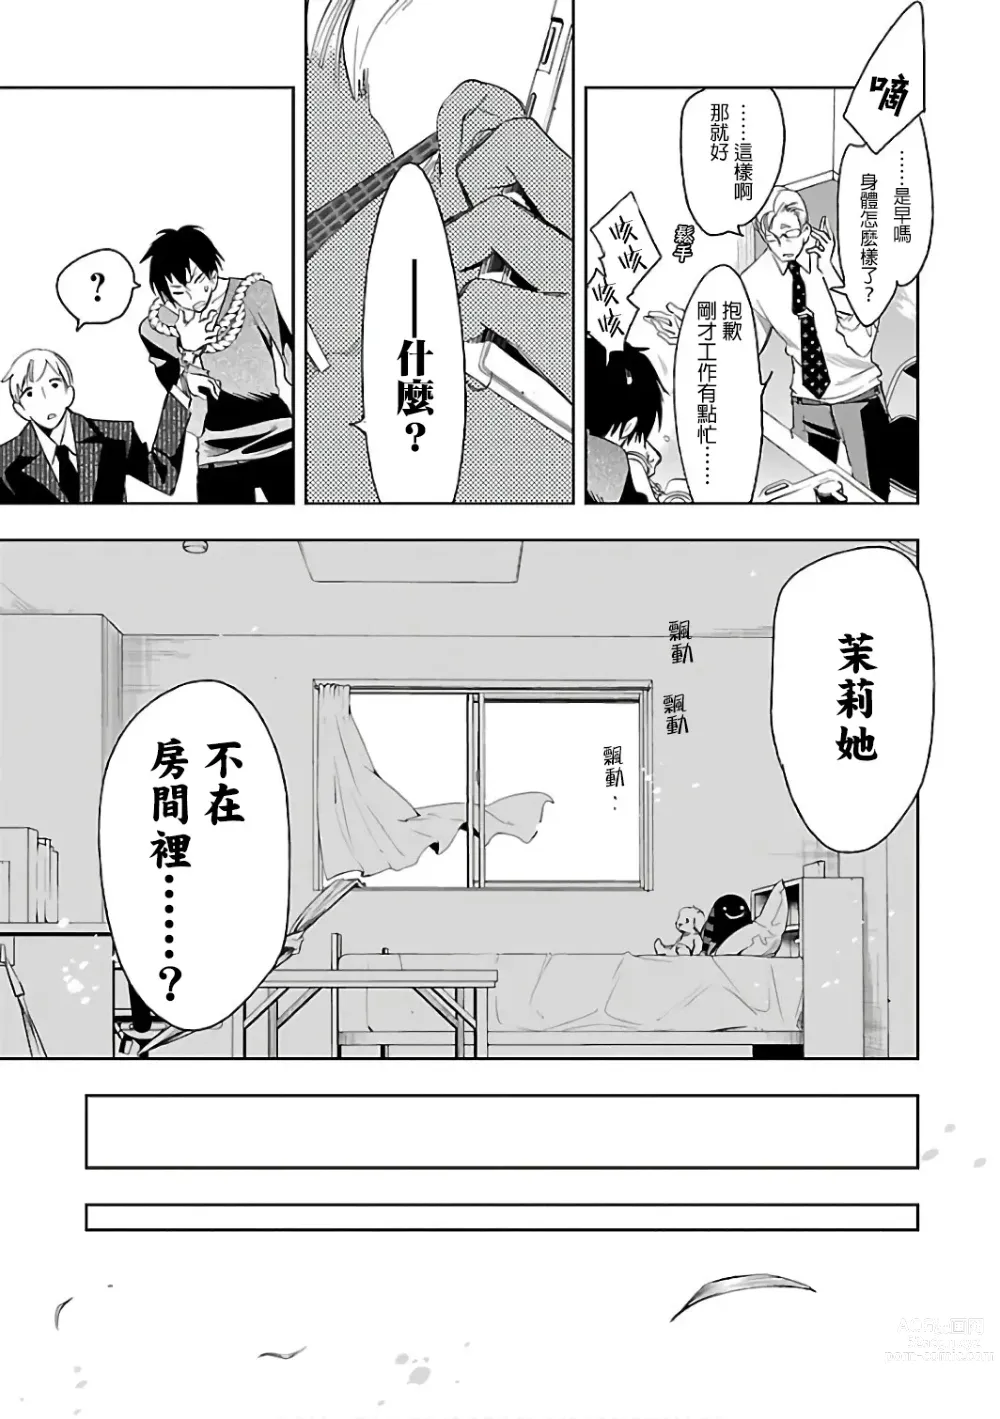 Page 15 of doujinshi 神さまの怨結び 第6巻